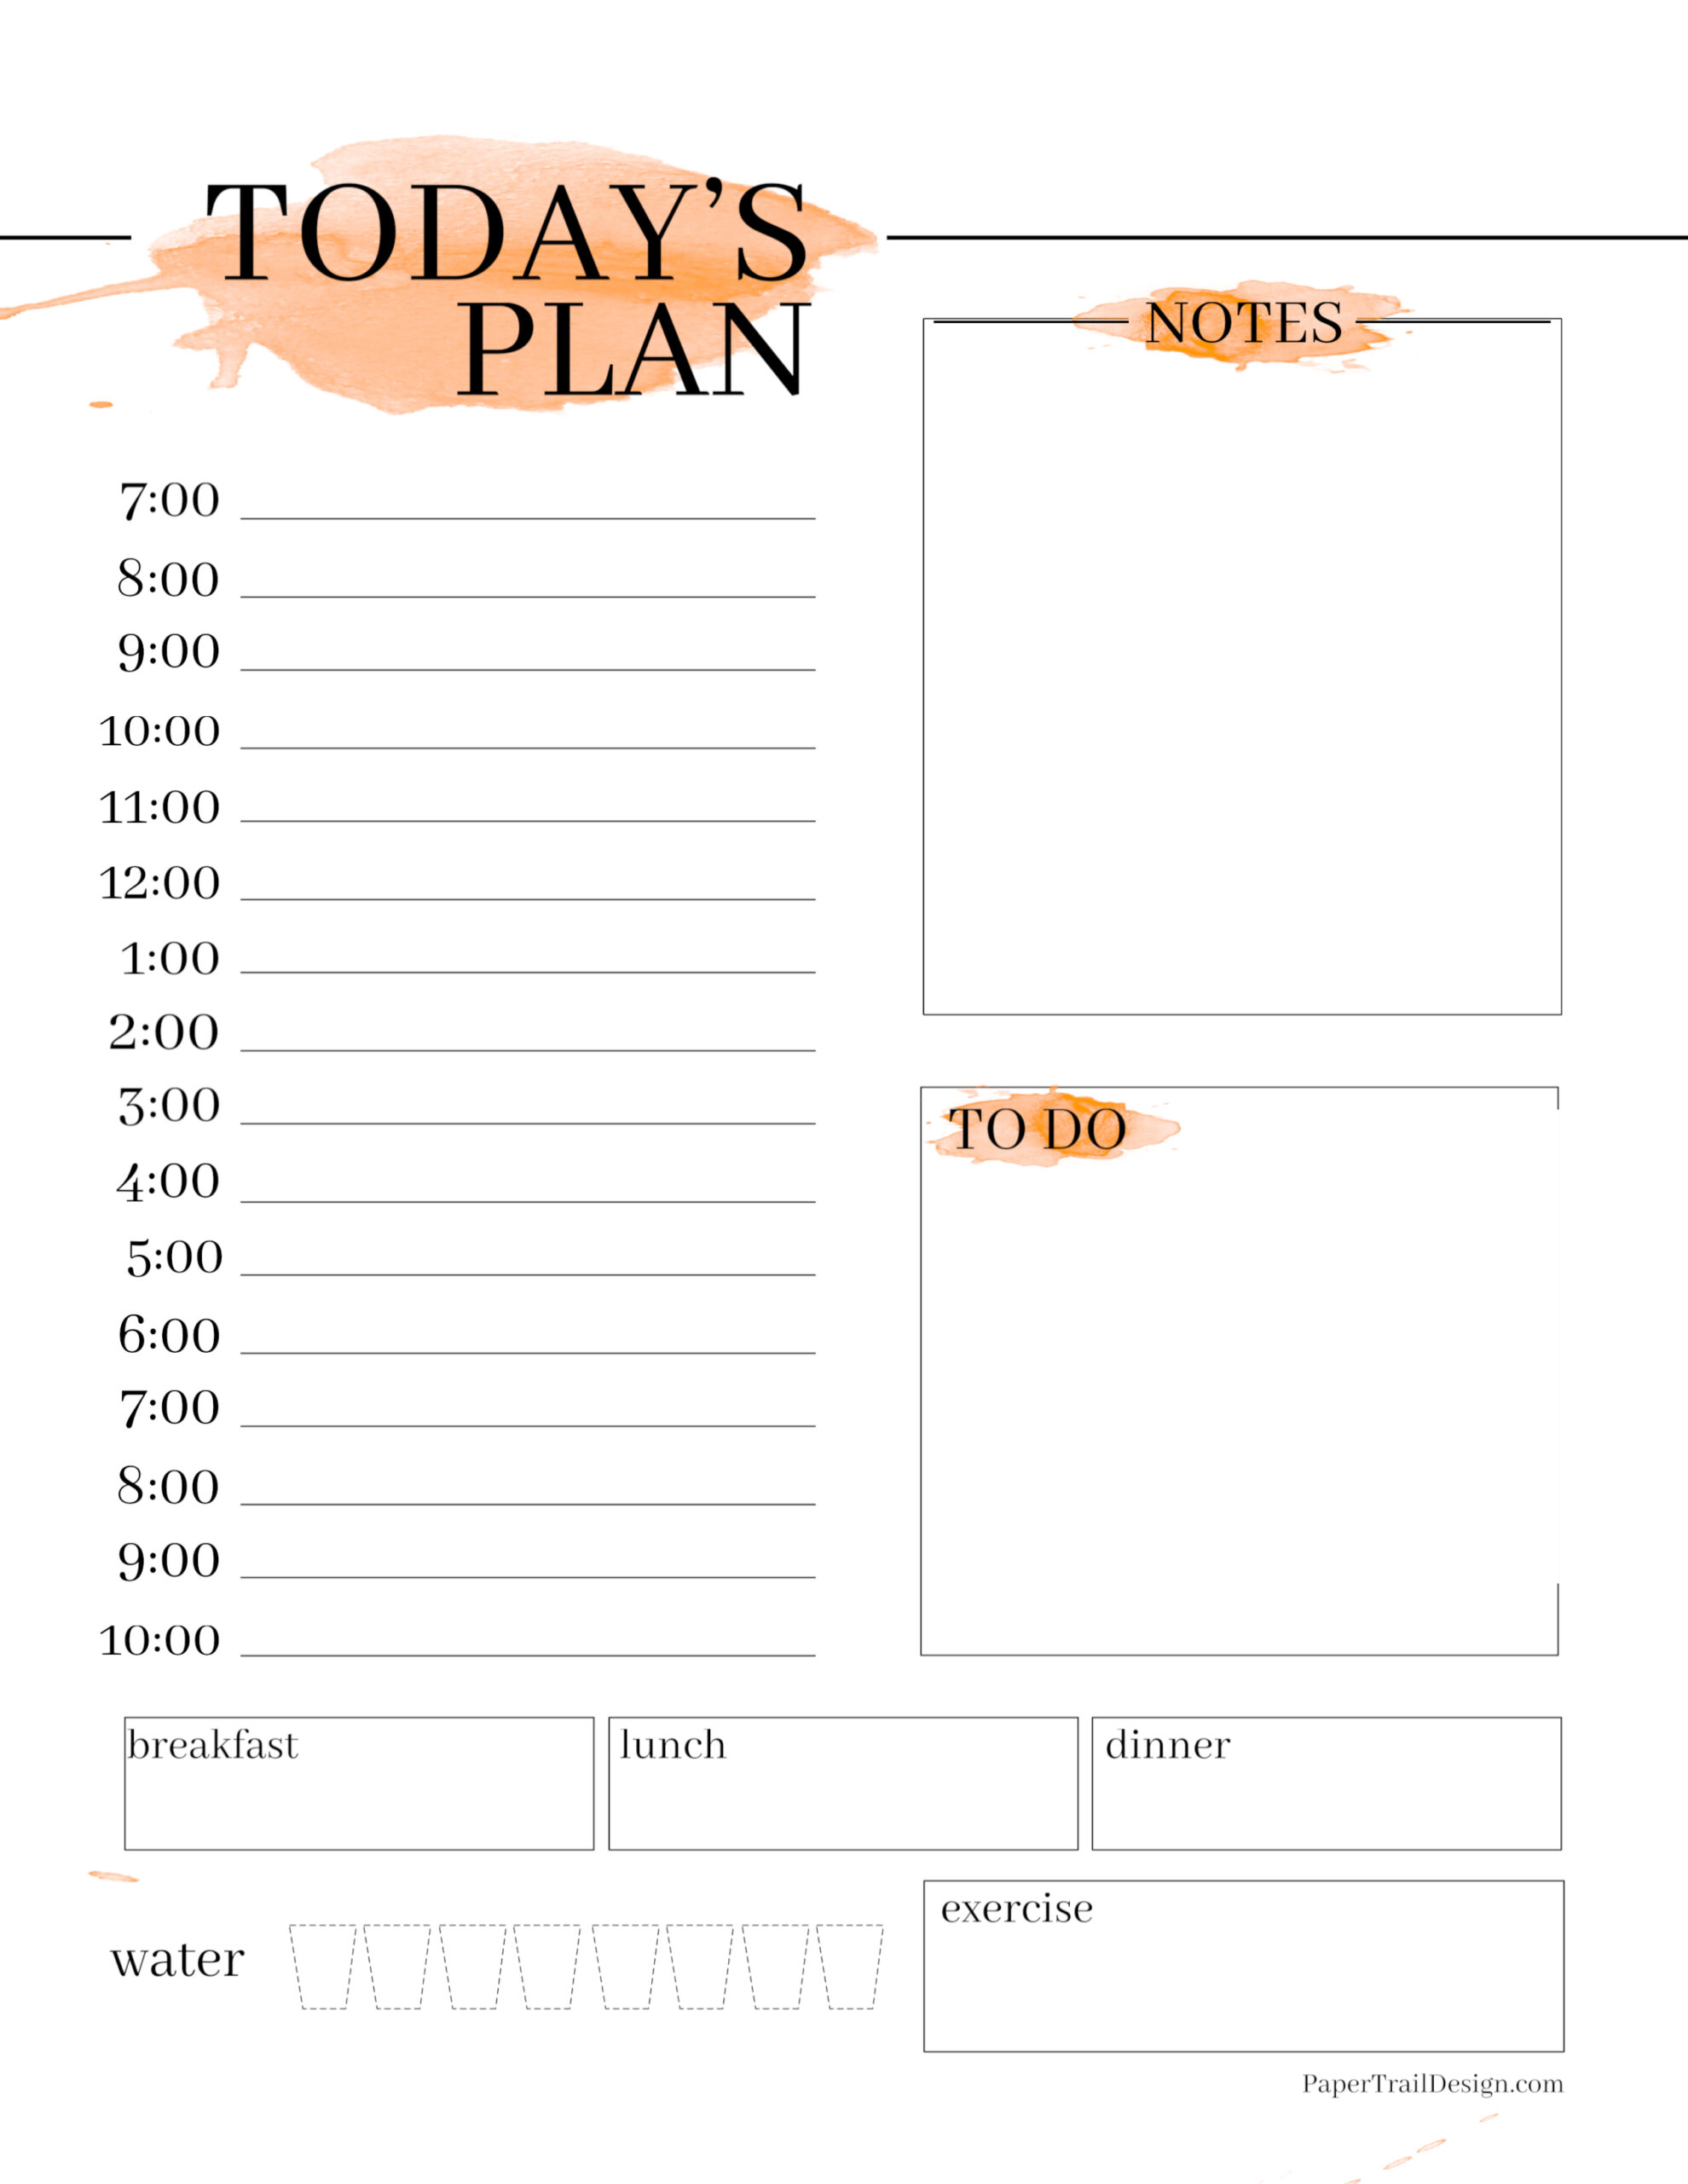 Free Printable Notes Template - Paper Trail Design